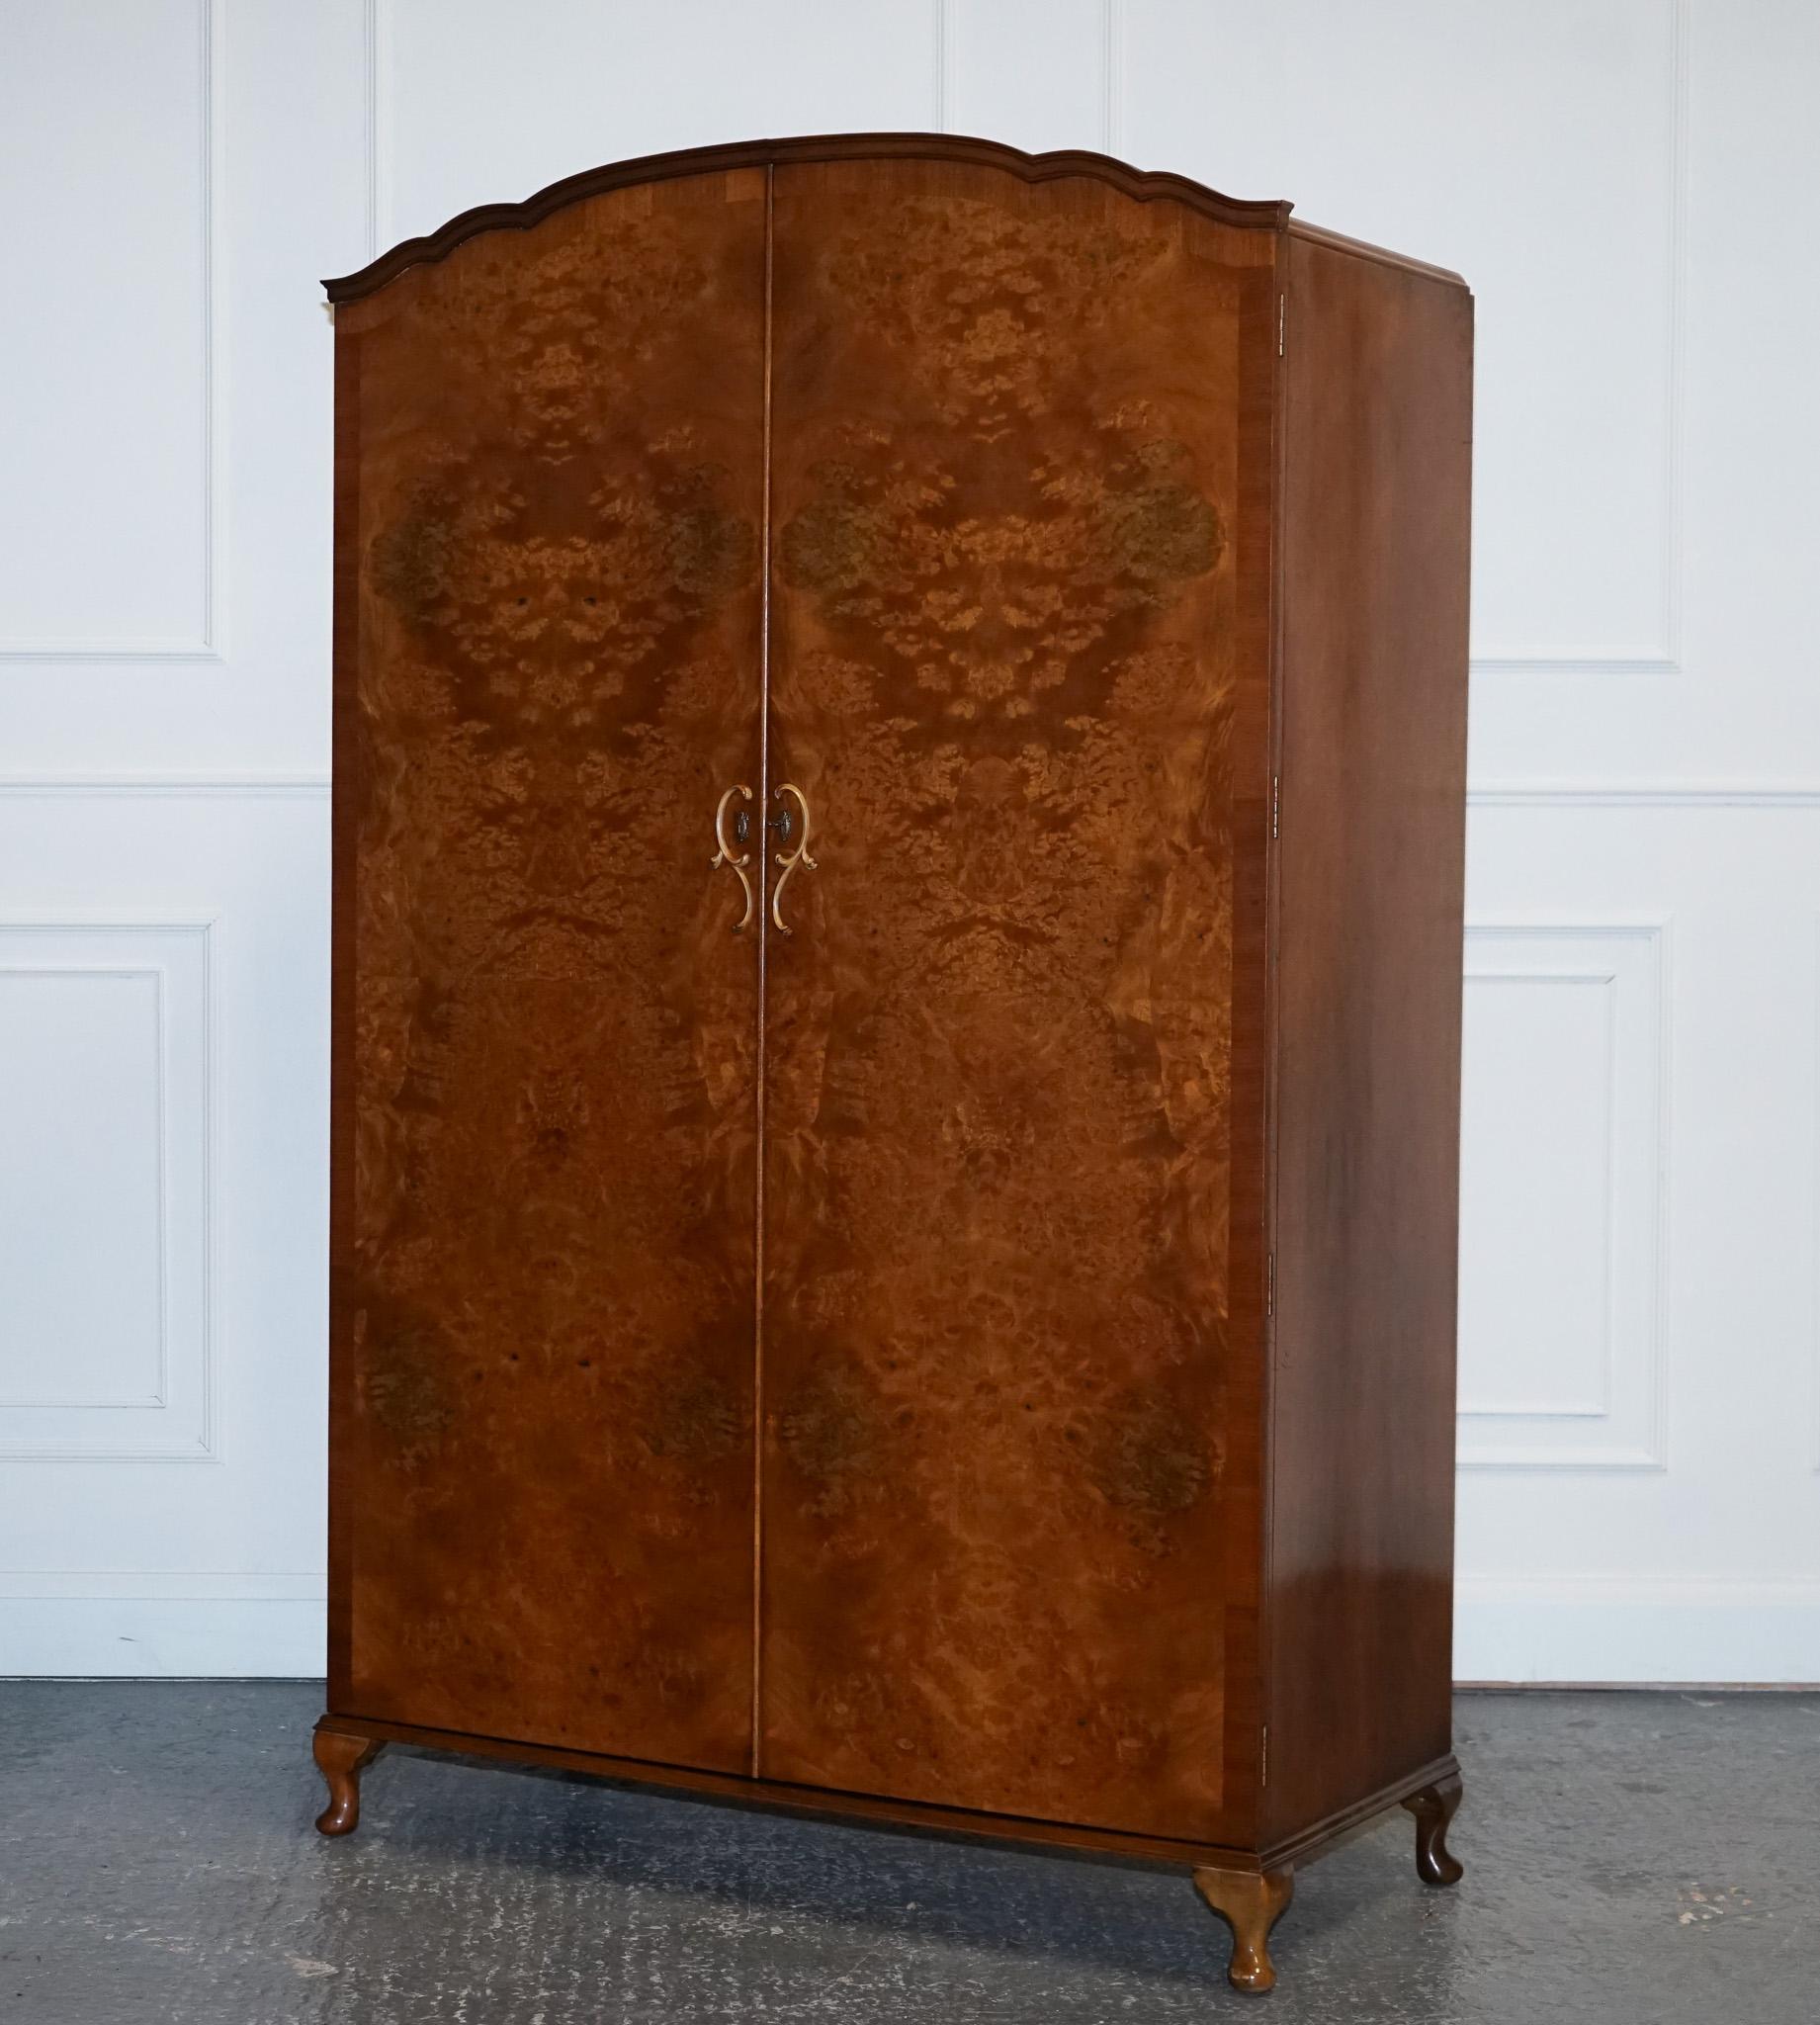 
We are delighted to offer for sale this Beautiful Art Deco 1940s Burr Walnut Wardrobe With Queen Anne Feet Style.

A 1940s Art Deco Burr Walnut Wardrobe with Queen Anne feet is a stunning piece of furniture that embodies the elegance and